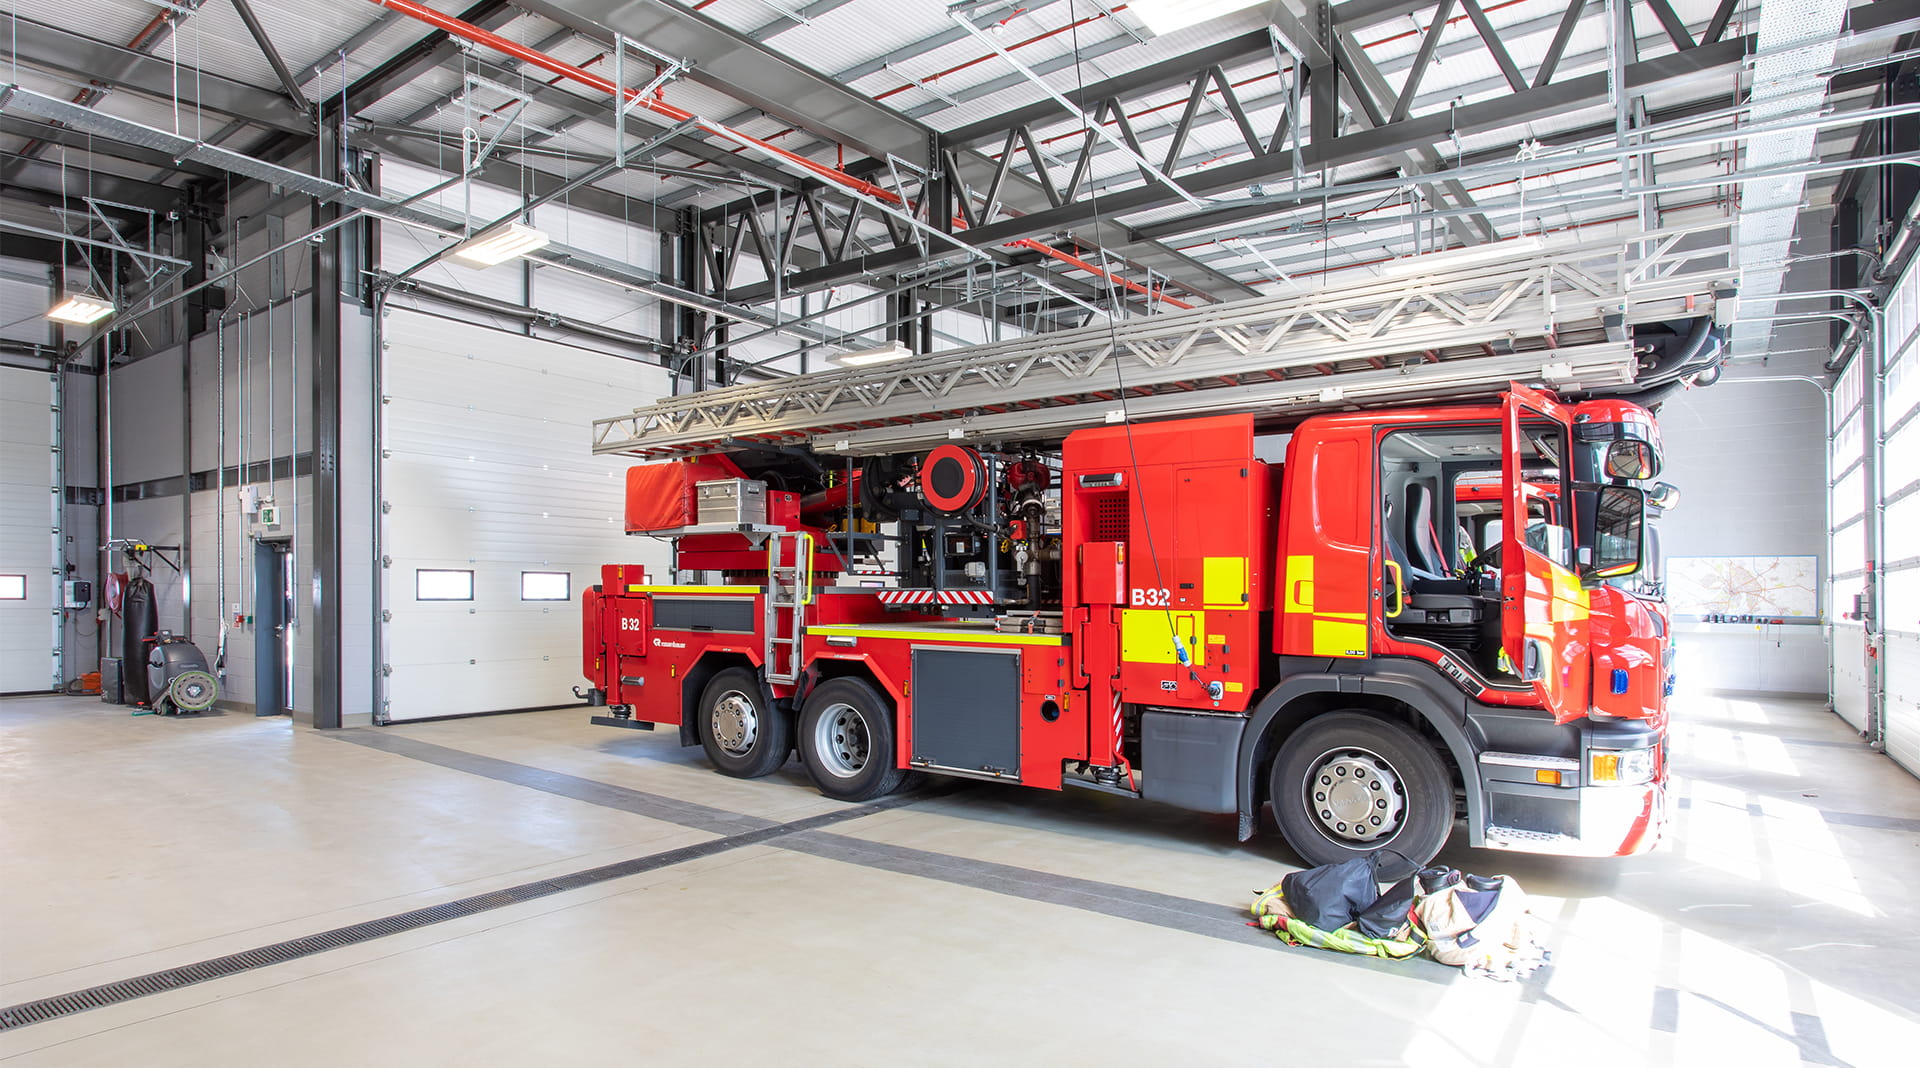 Chester fire and rescue service fire engine in new garage